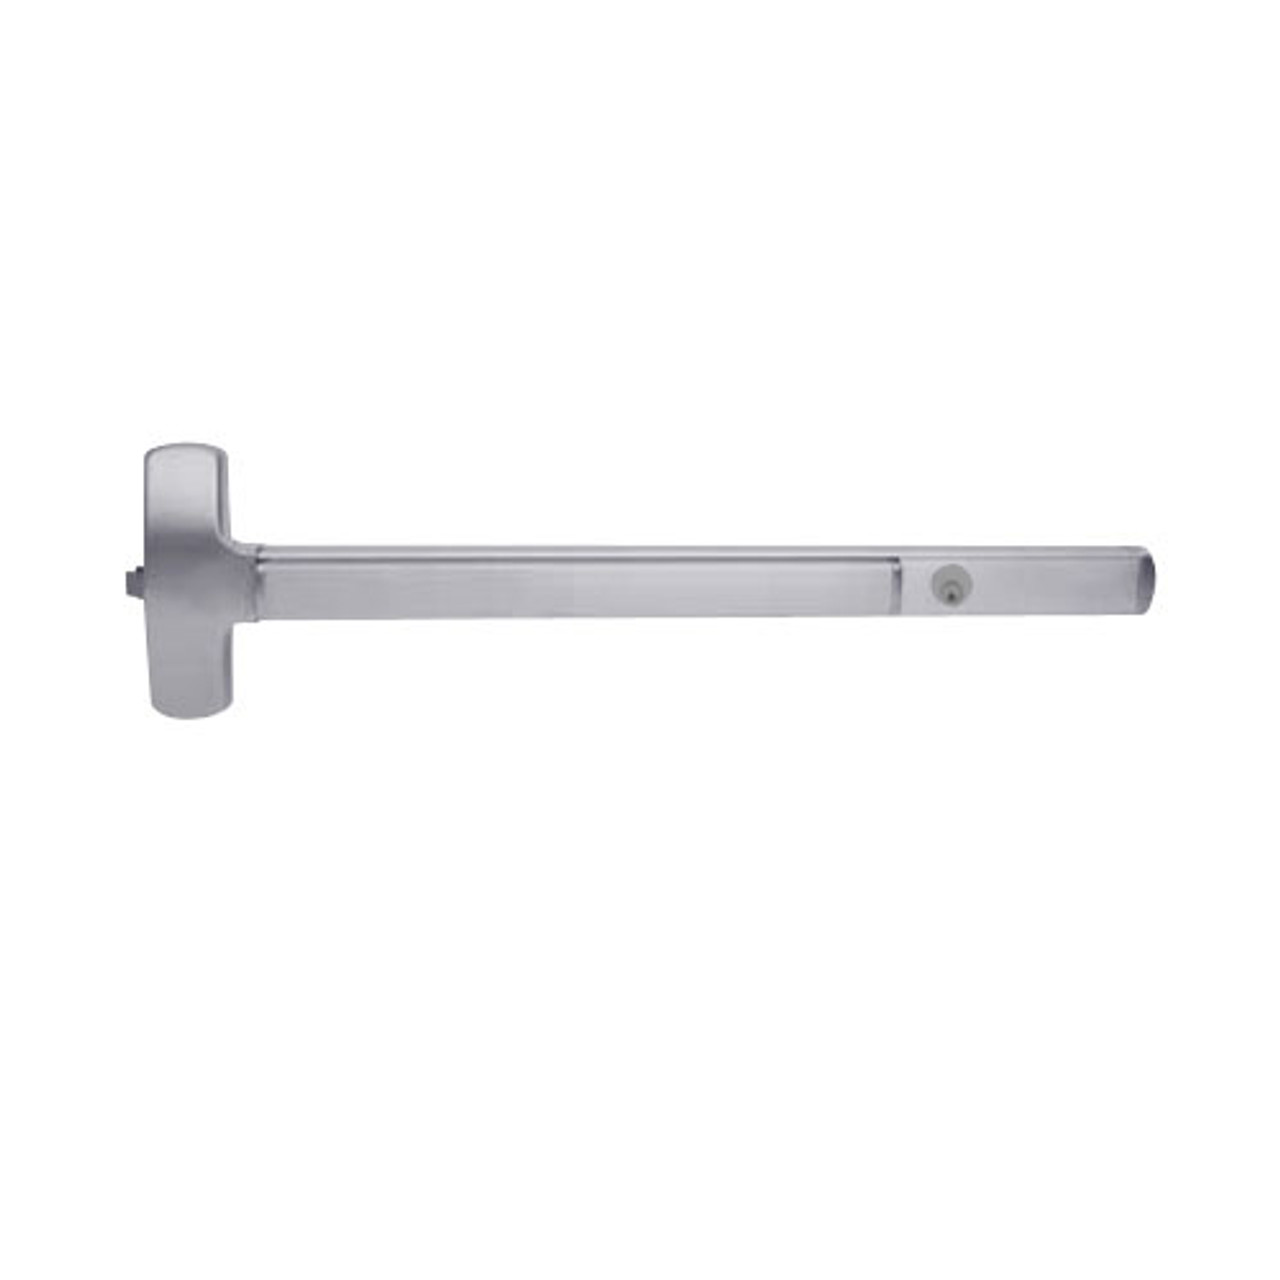 CD25-R-EO-US26D-4 Falcon Exit Device in Satin Chrome